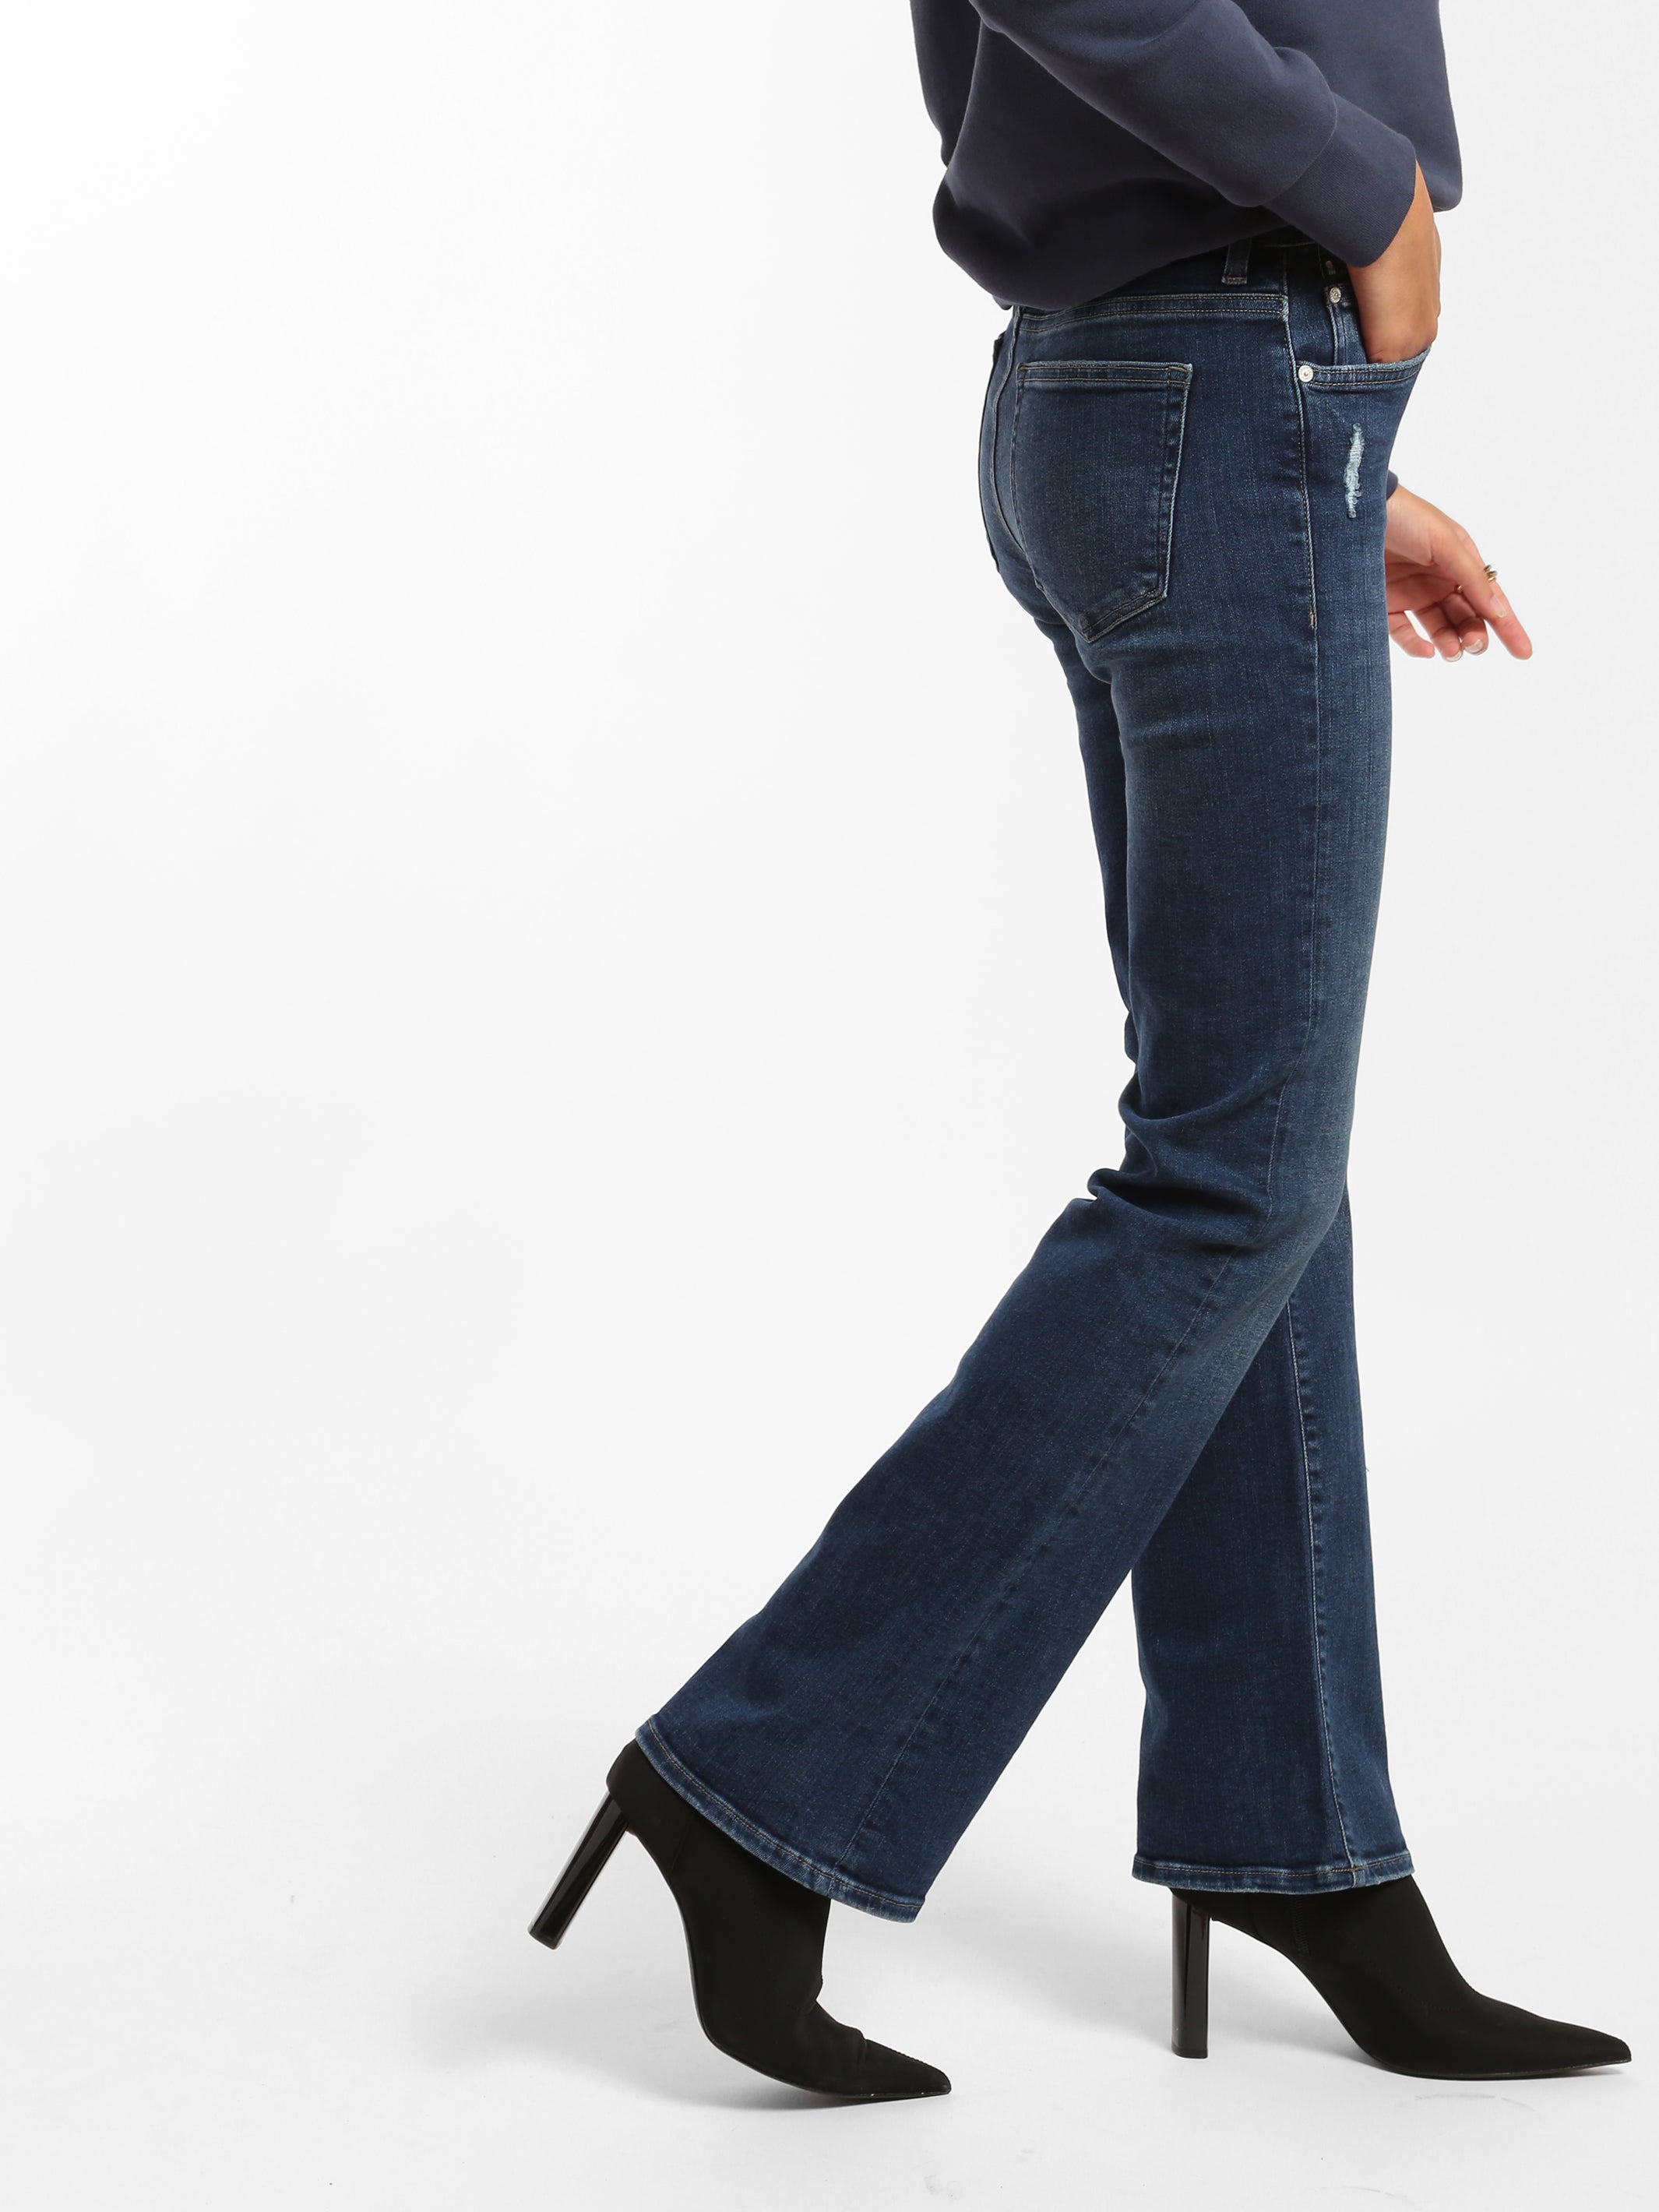 Women's Organic Cotton High Waisted Skinny Flare Jeans in Dark